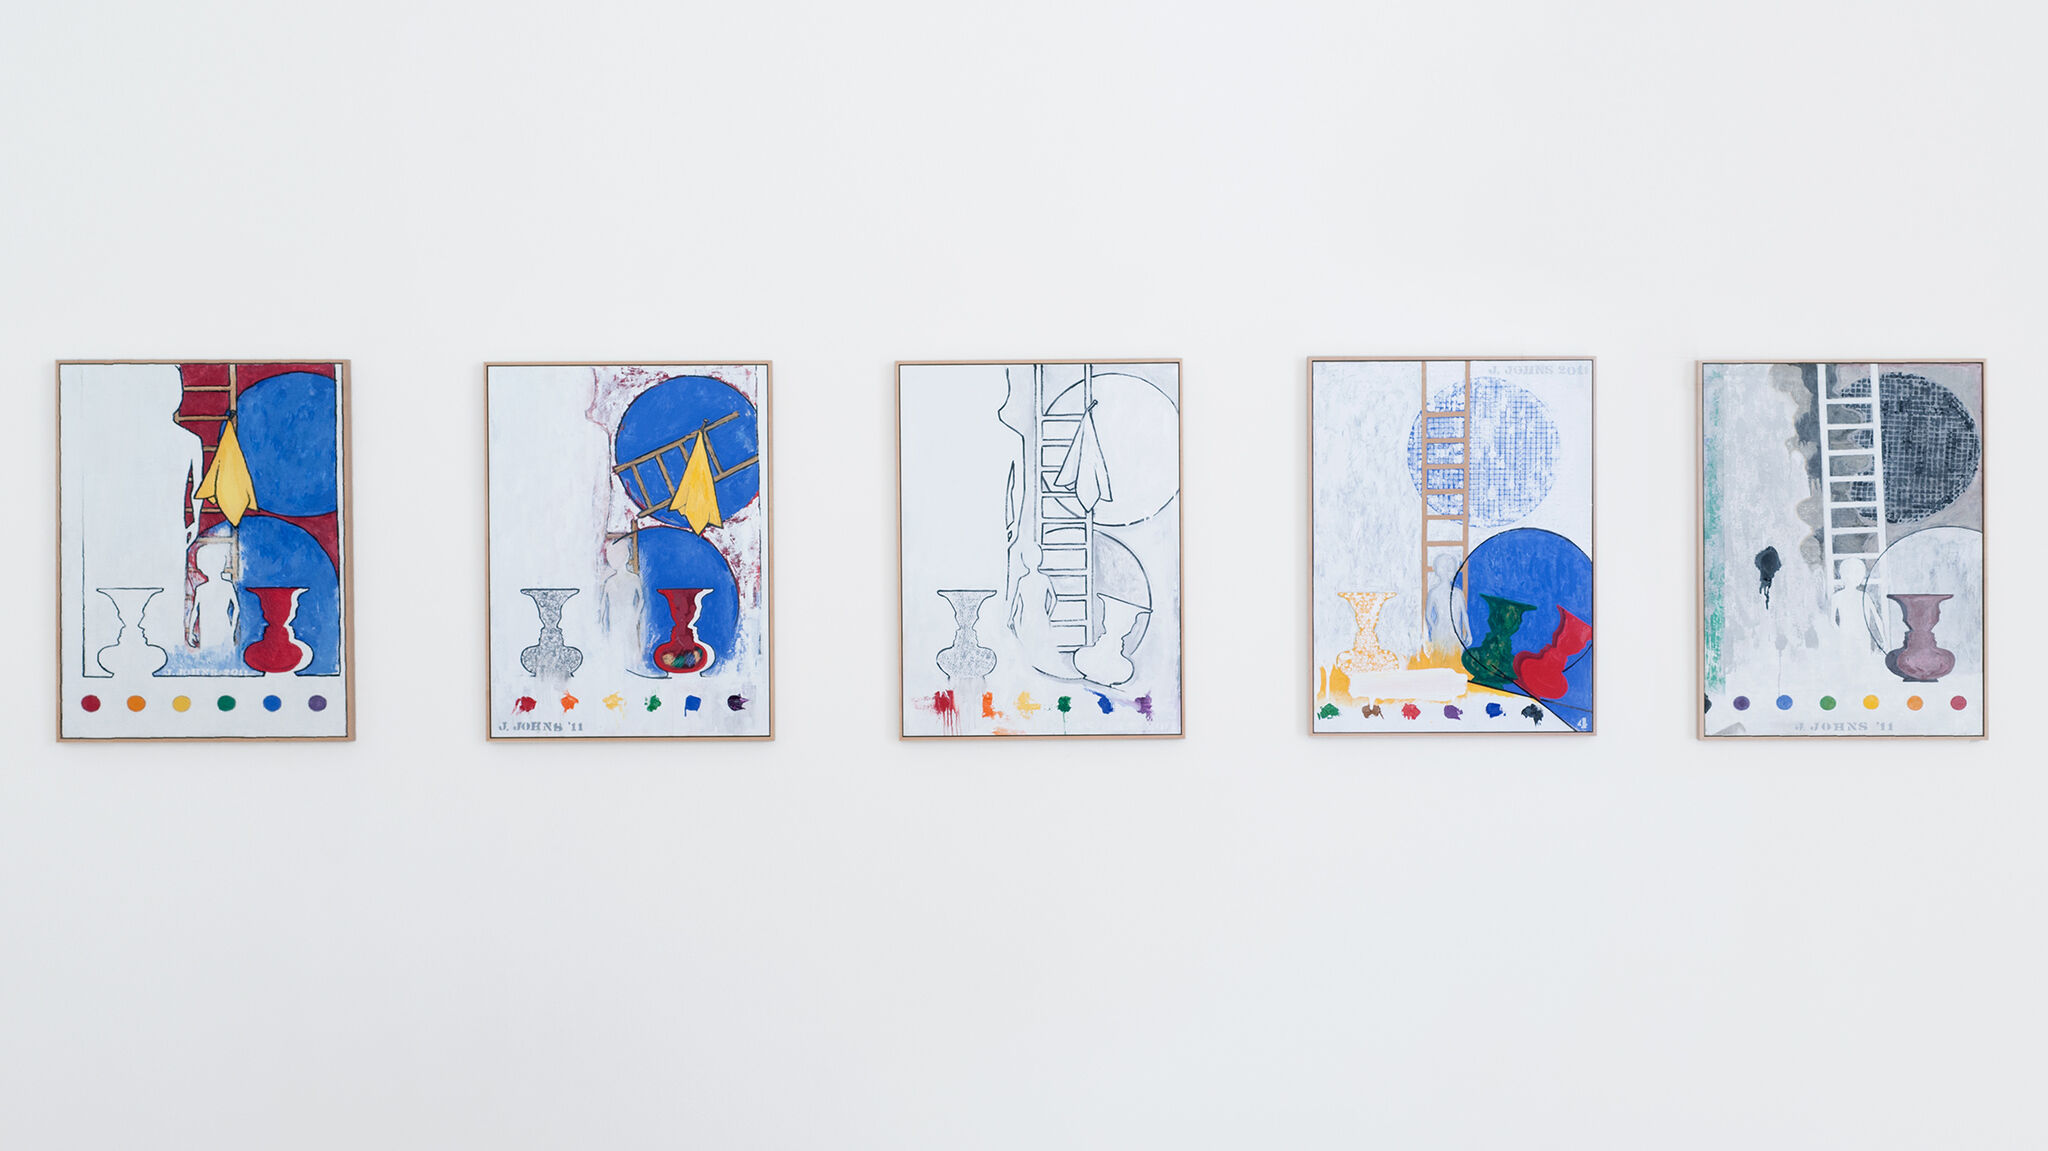 Five framed works by Jasper Johns are mounted side-by-side on a wall.